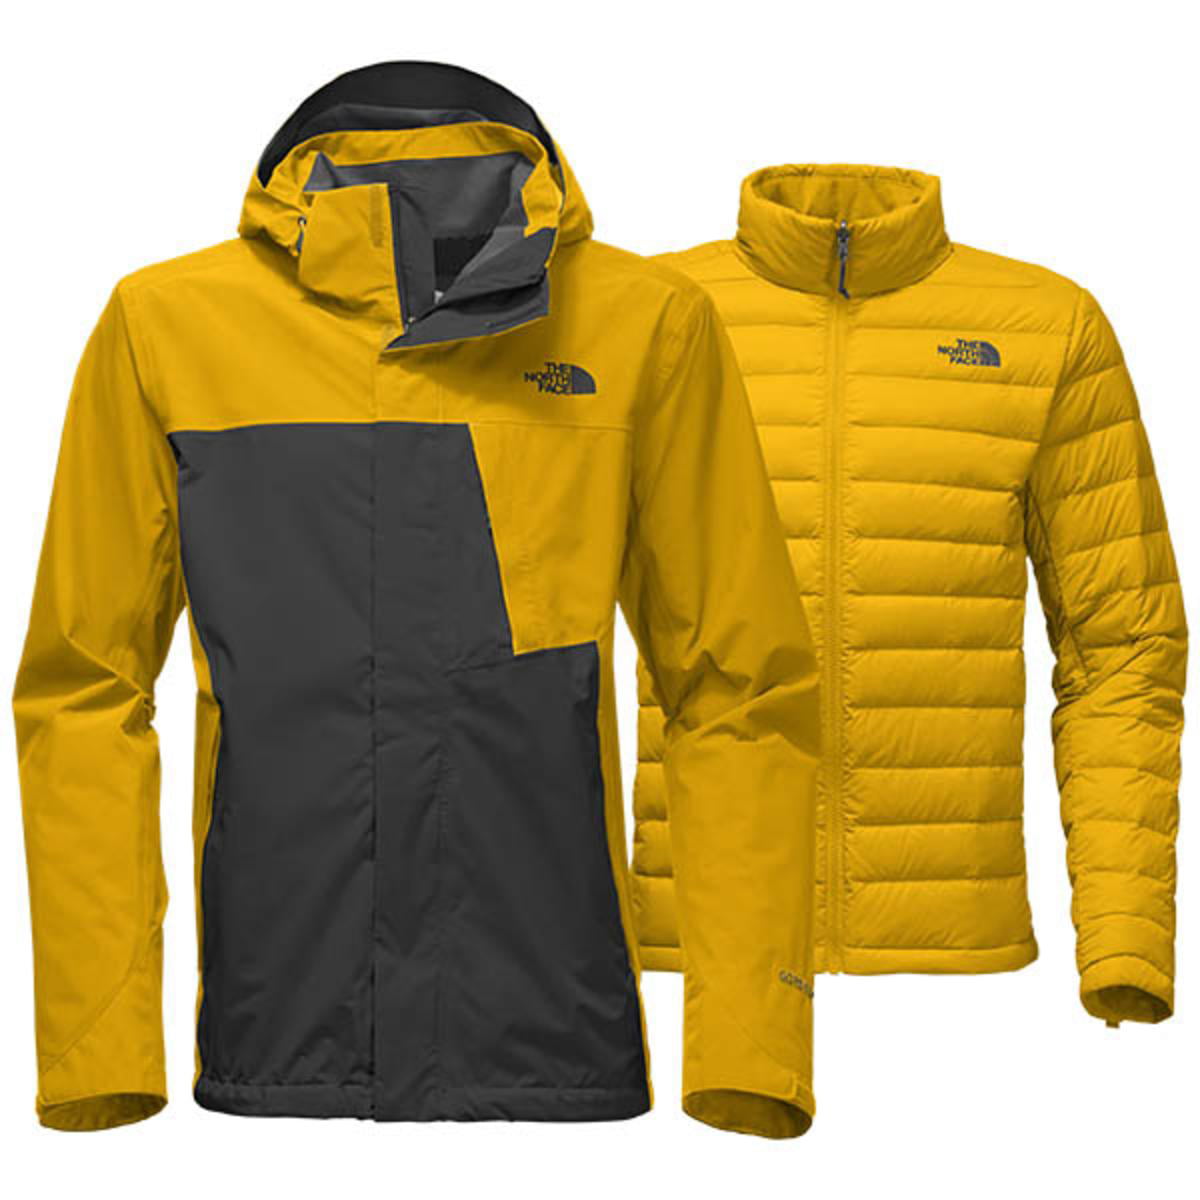 North Face Mountain Triclimate Jacket - Walmart.com